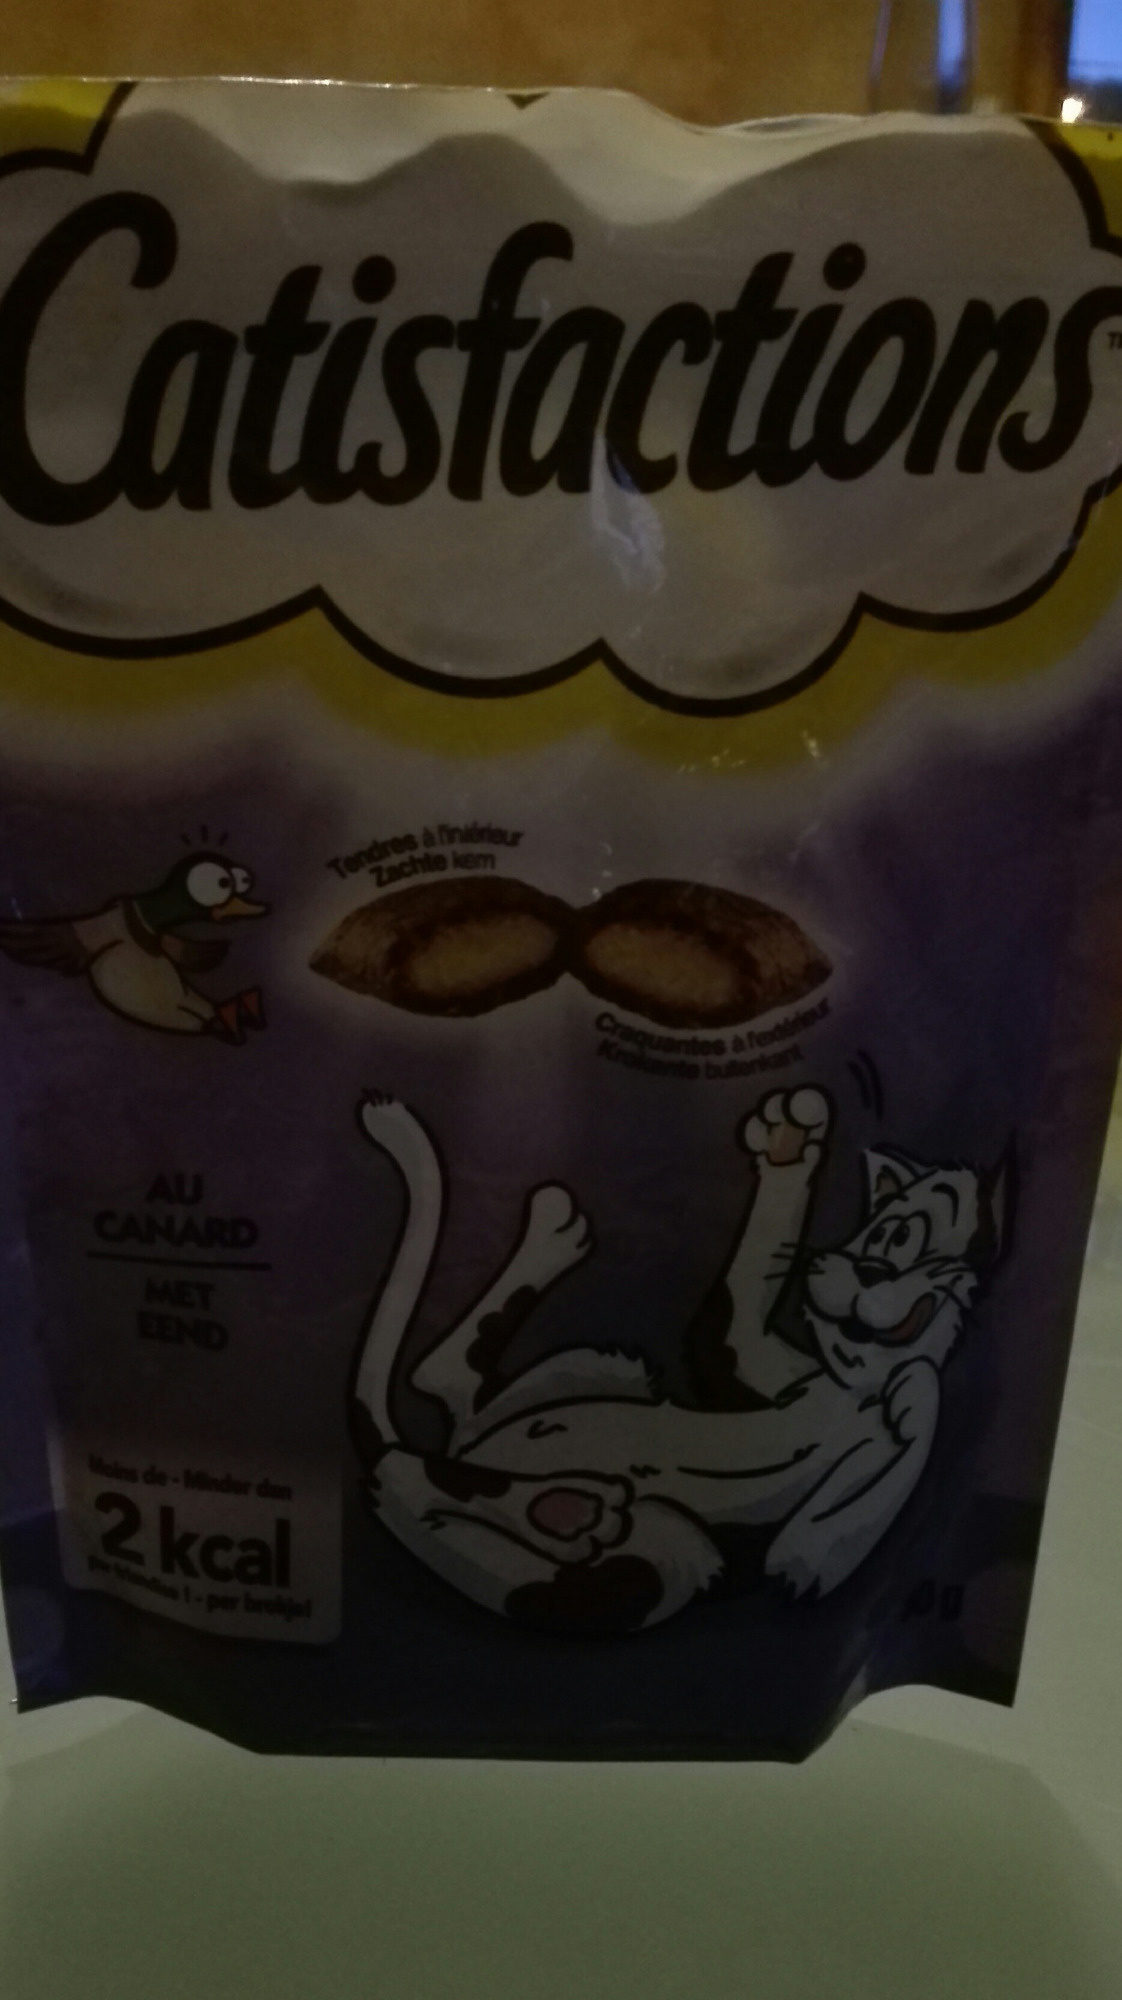 Catisfactions - Canard 60G - Product - fr